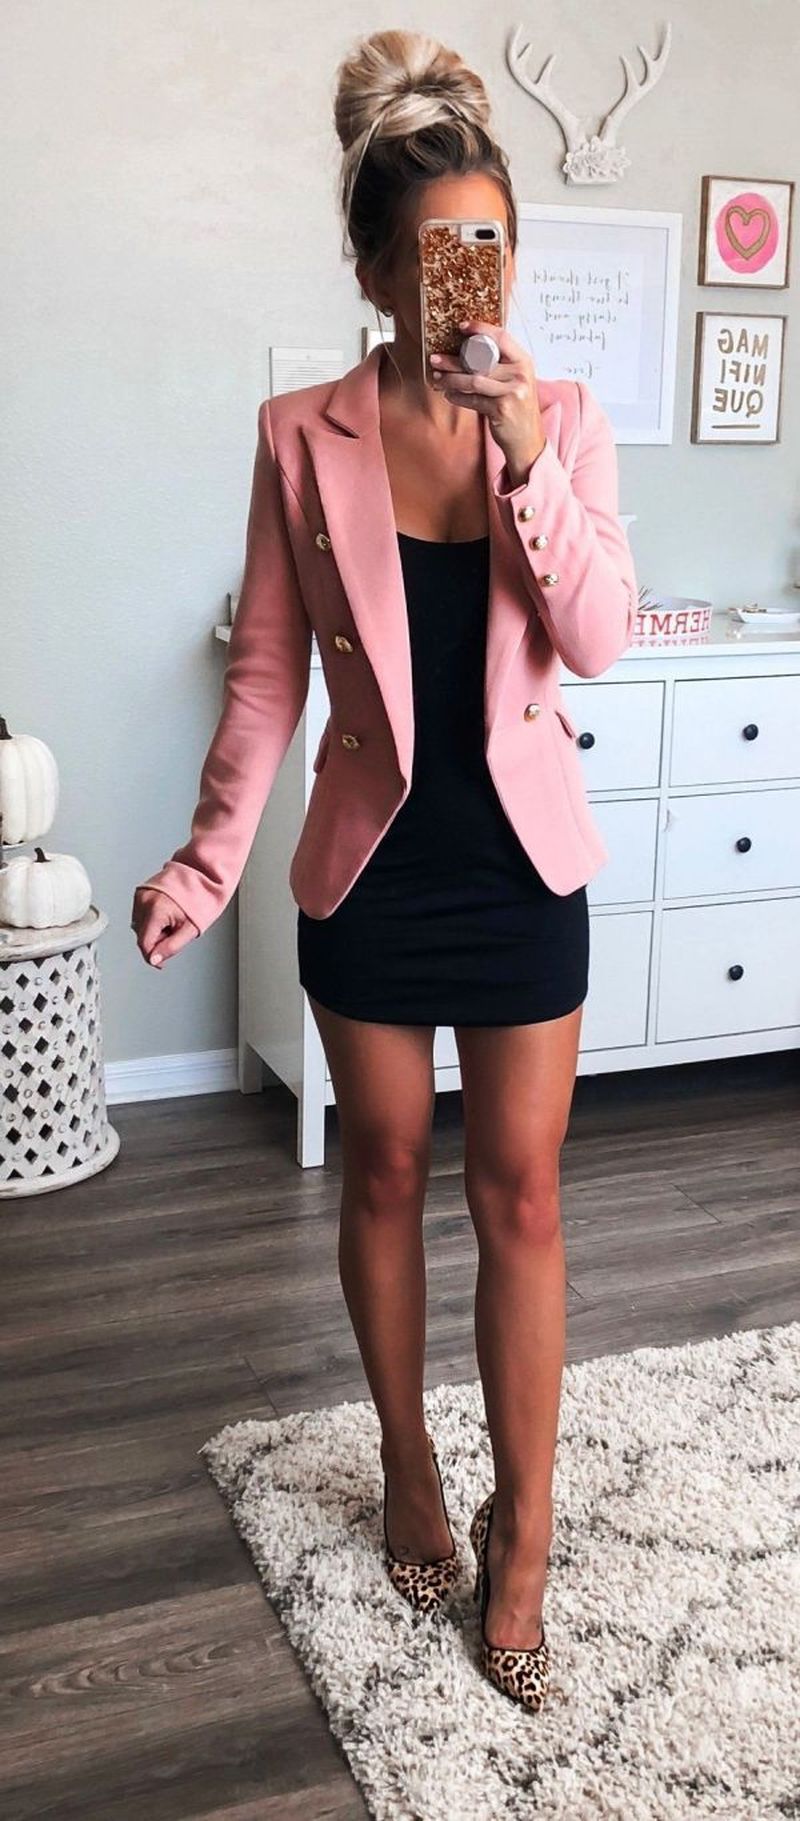 42 Casual Spring Work Outfits Ideas for Women - Explore Dream Discover Blog - 42 Casual Spring Work Outfits Ideas for Women - Explore Dream Discover Blog -   17 style Outfits work ideas